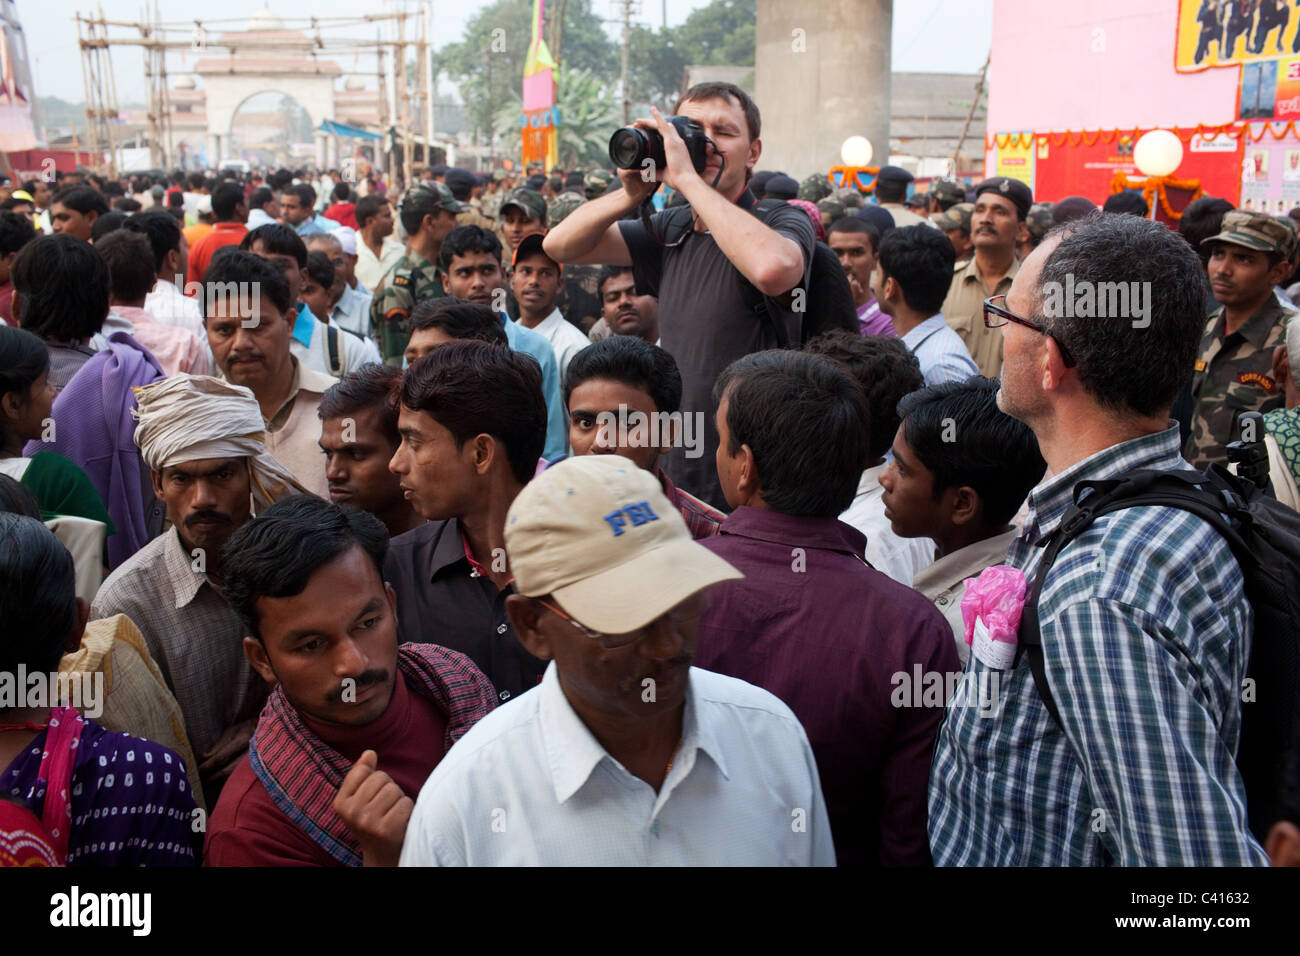 A foreign tourist and photographer in the crowd at Sonepur Mela in Sonepur near Patna and Hajipur in Bihar state, India. Stock Photo